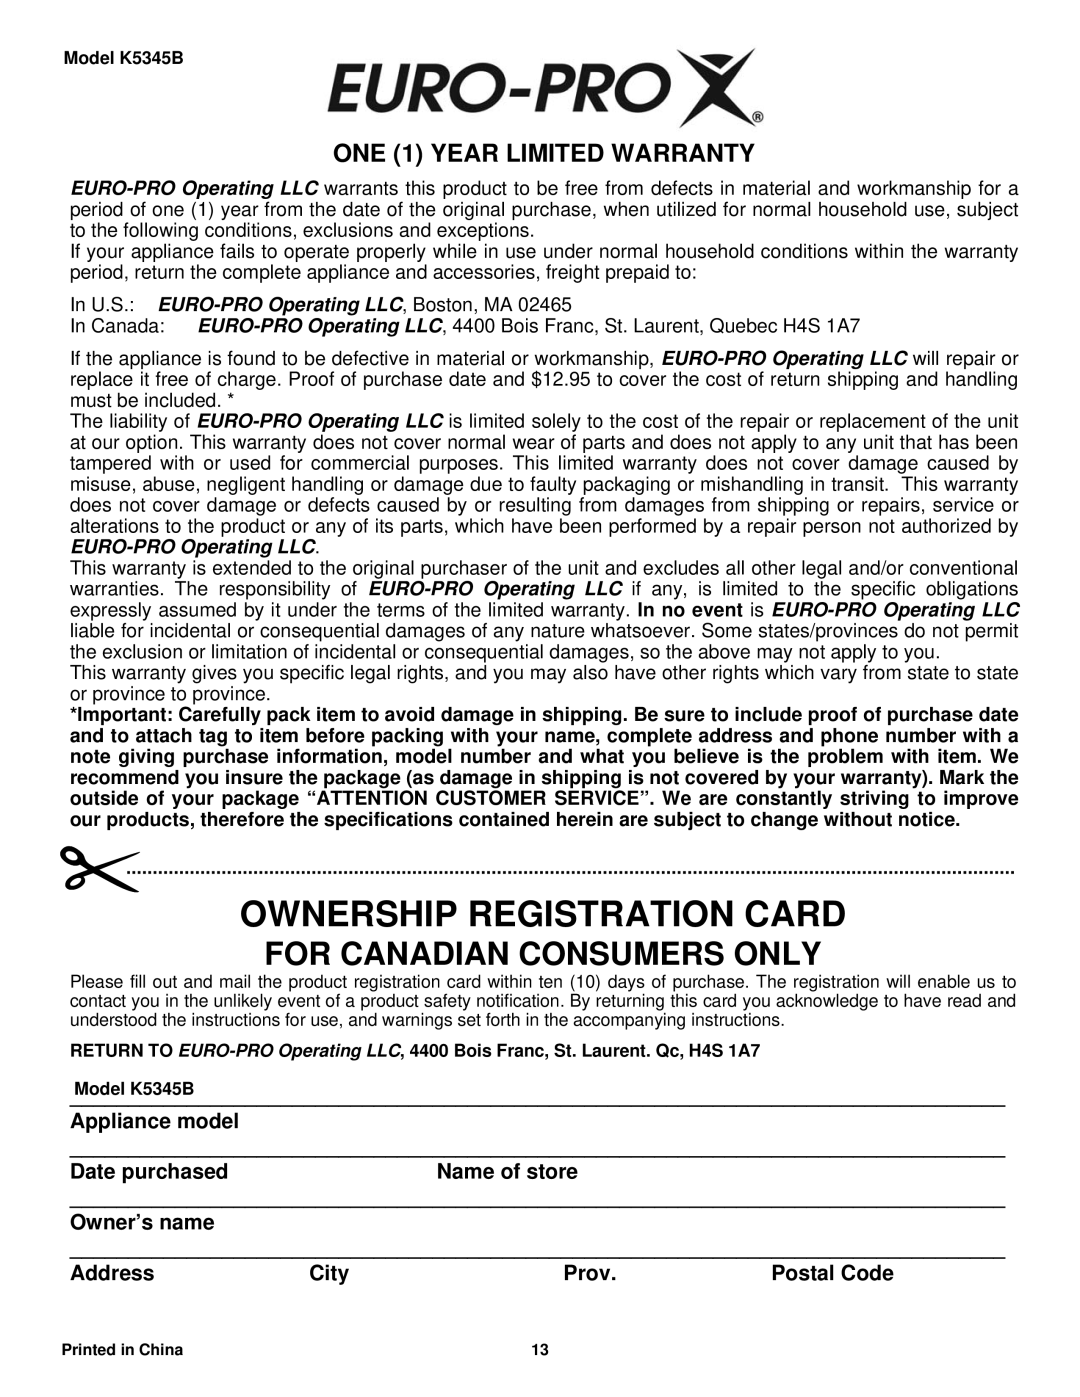 Euro-Pro K5345B owner manual Ownership Registration Card, For Canadian Consumers Only, ONE 1 YEAR LIMITED WARRANTY 